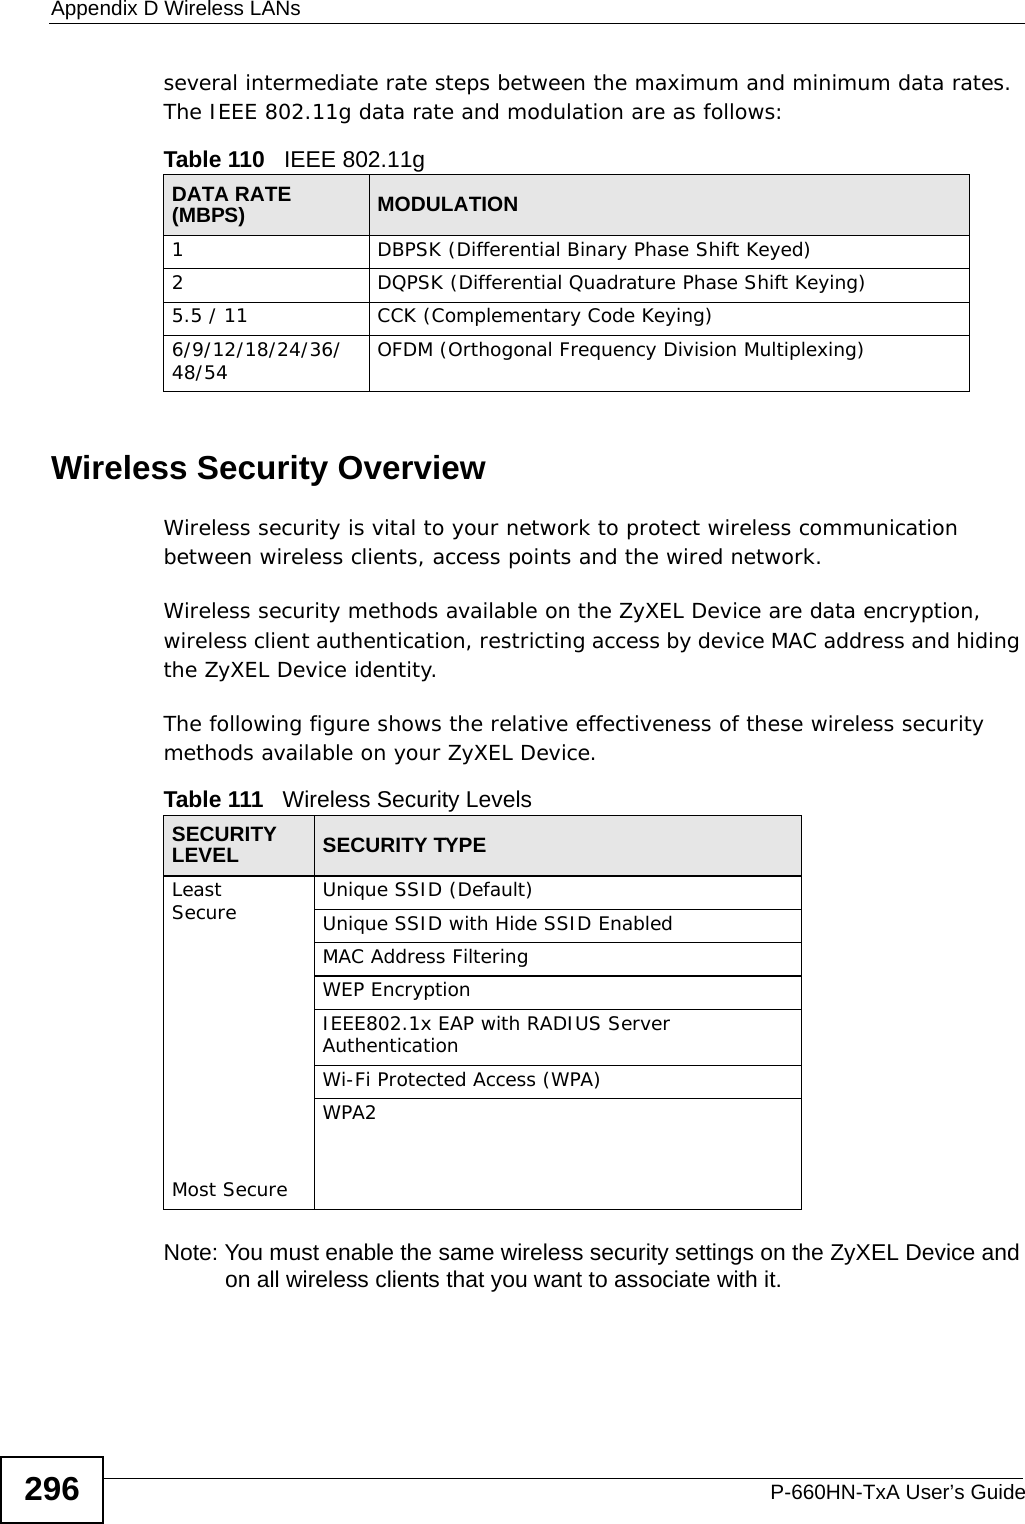 Appendix D Wireless LANsP-660HN-TxA User’s Guide296several intermediate rate steps between the maximum and minimum data rates. The IEEE 802.11g data rate and modulation are as follows:Wireless Security OverviewWireless security is vital to your network to protect wireless communication between wireless clients, access points and the wired network.Wireless security methods available on the ZyXEL Device are data encryption, wireless client authentication, restricting access by device MAC address and hiding the ZyXEL Device identity.The following figure shows the relative effectiveness of these wireless security methods available on your ZyXEL Device.Note: You must enable the same wireless security settings on the ZyXEL Device and on all wireless clients that you want to associate with it. Table 110   IEEE 802.11gDATA RATE (MBPS) MODULATION1 DBPSK (Differential Binary Phase Shift Keyed)2 DQPSK (Differential Quadrature Phase Shift Keying)5.5 / 11 CCK (Complementary Code Keying) 6/9/12/18/24/36/48/54 OFDM (Orthogonal Frequency Division Multiplexing) Table 111   Wireless Security LevelsSECURITY LEVEL SECURITY TYPELeast       Secure                                                                                  Most SecureUnique SSID (Default)Unique SSID with Hide SSID EnabledMAC Address FilteringWEP EncryptionIEEE802.1x EAP with RADIUS Server AuthenticationWi-Fi Protected Access (WPA)WPA2